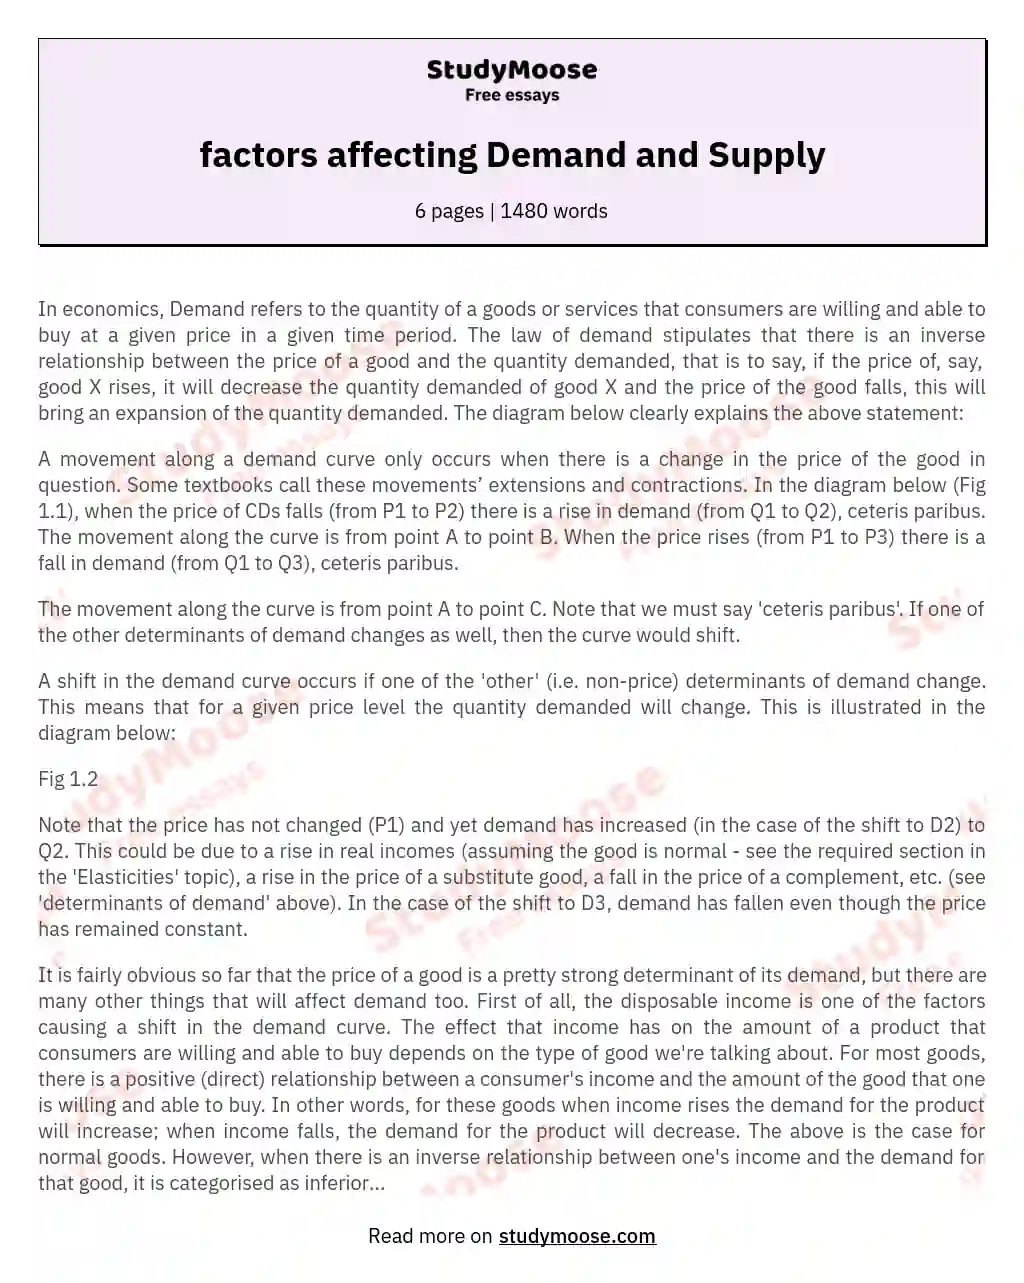 factors affecting Demand and Supply essay